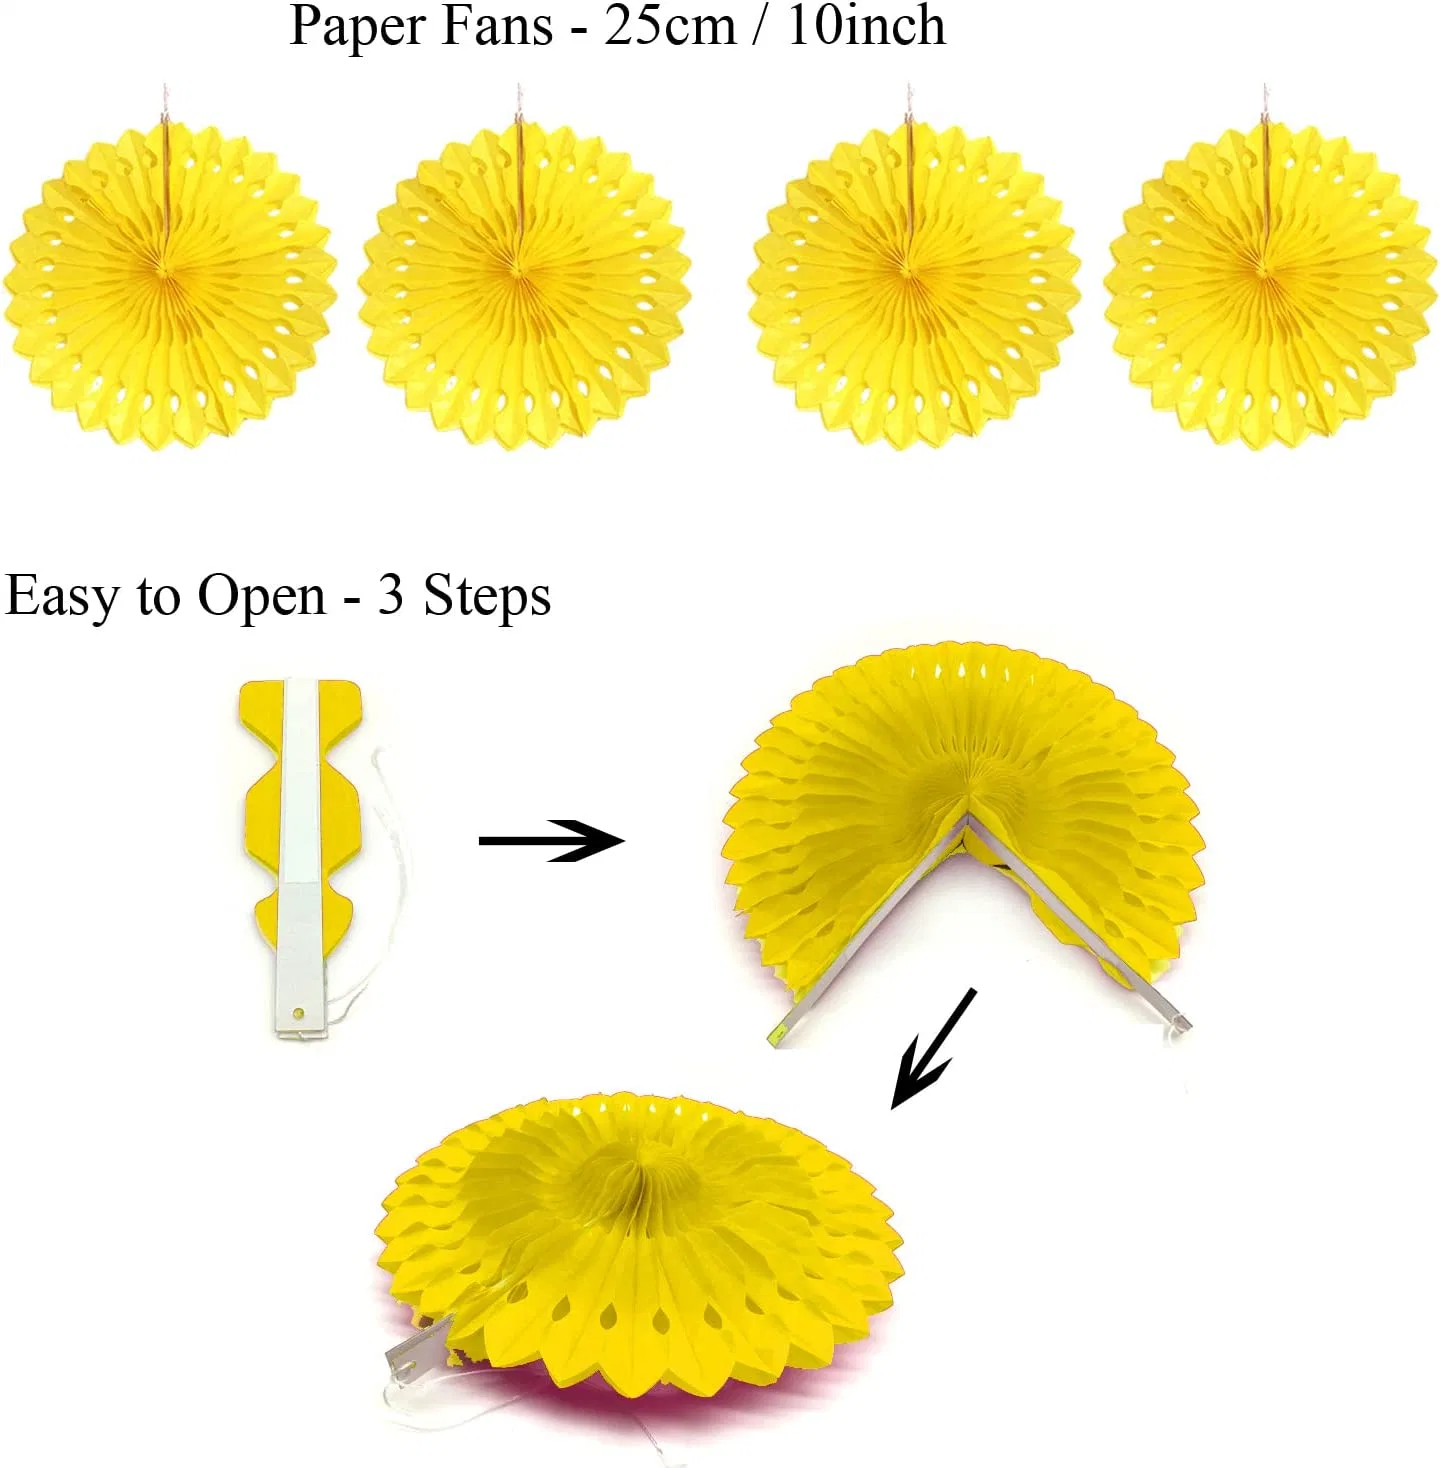 21 PCS Yellow Hanging Paper Fans POM Poms Flowers, Garlands String Polka DOT and Triangle Bunting Flags for Birthday Baby Shower Wedding Party Decorations